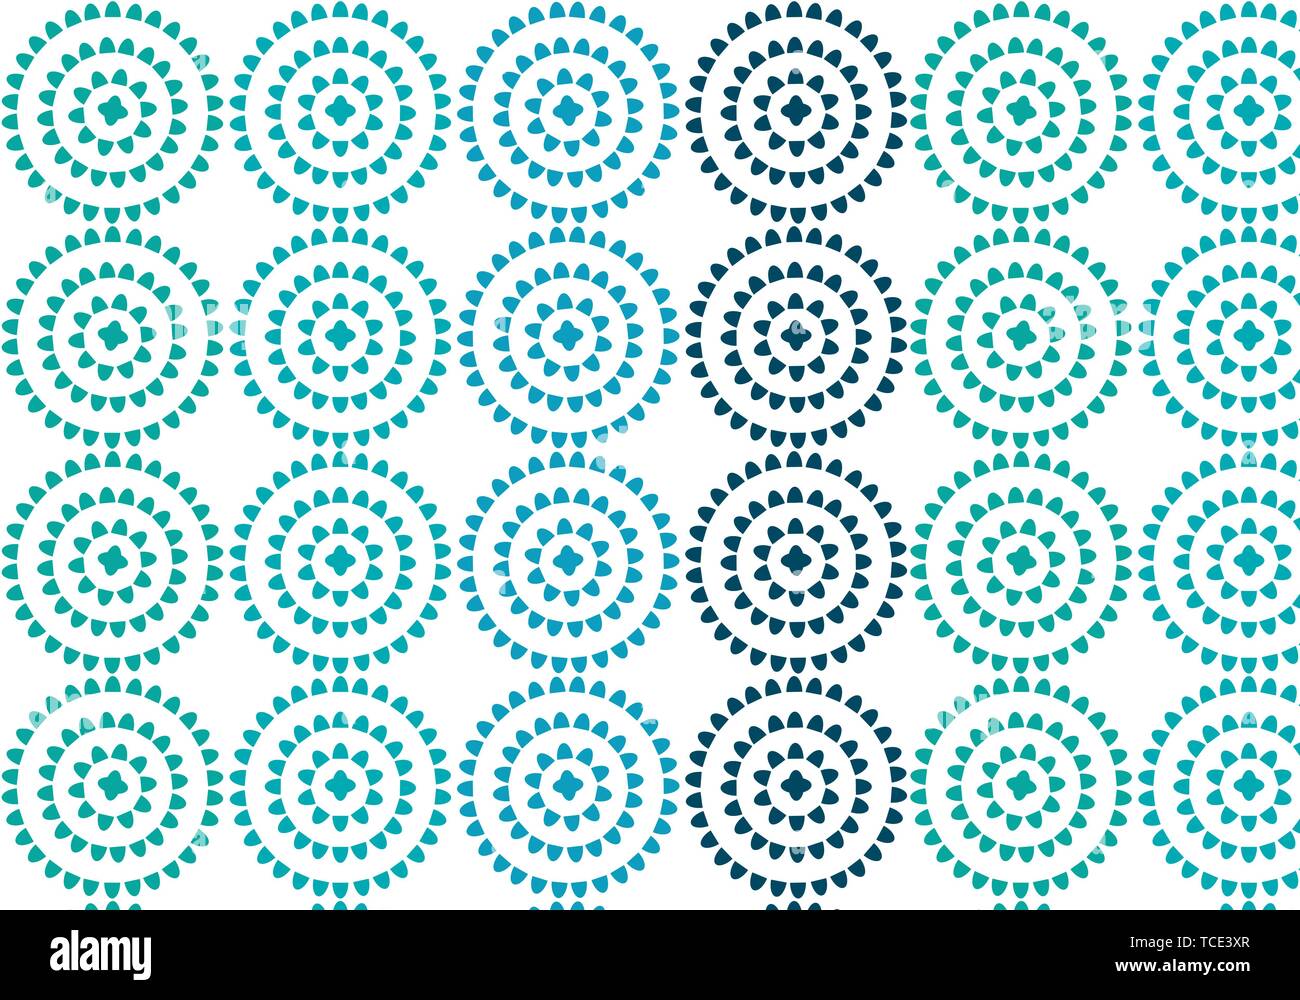 Yoga mat vector pattern illustration in blue and turquoise Stock Vector